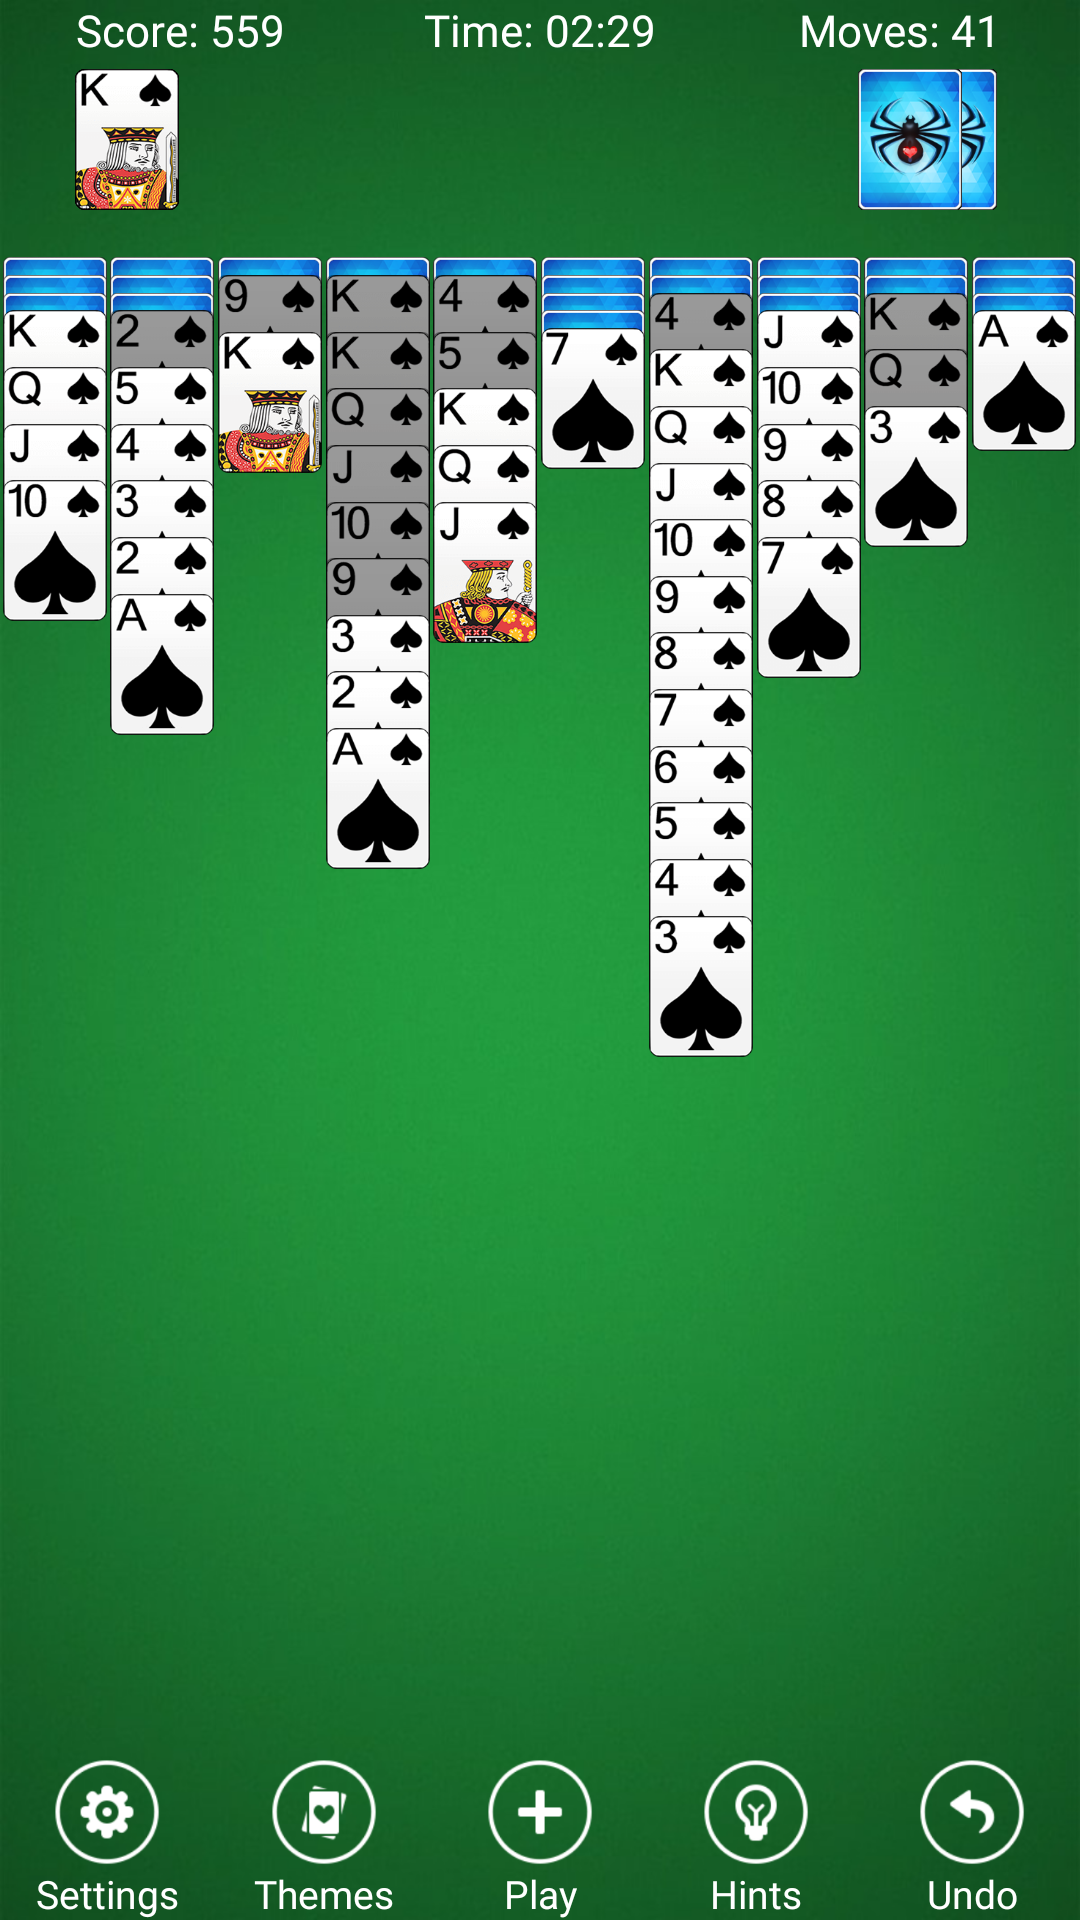 Screenshot 1 of ពីងពាង Solitaire 4.2.1.20210907